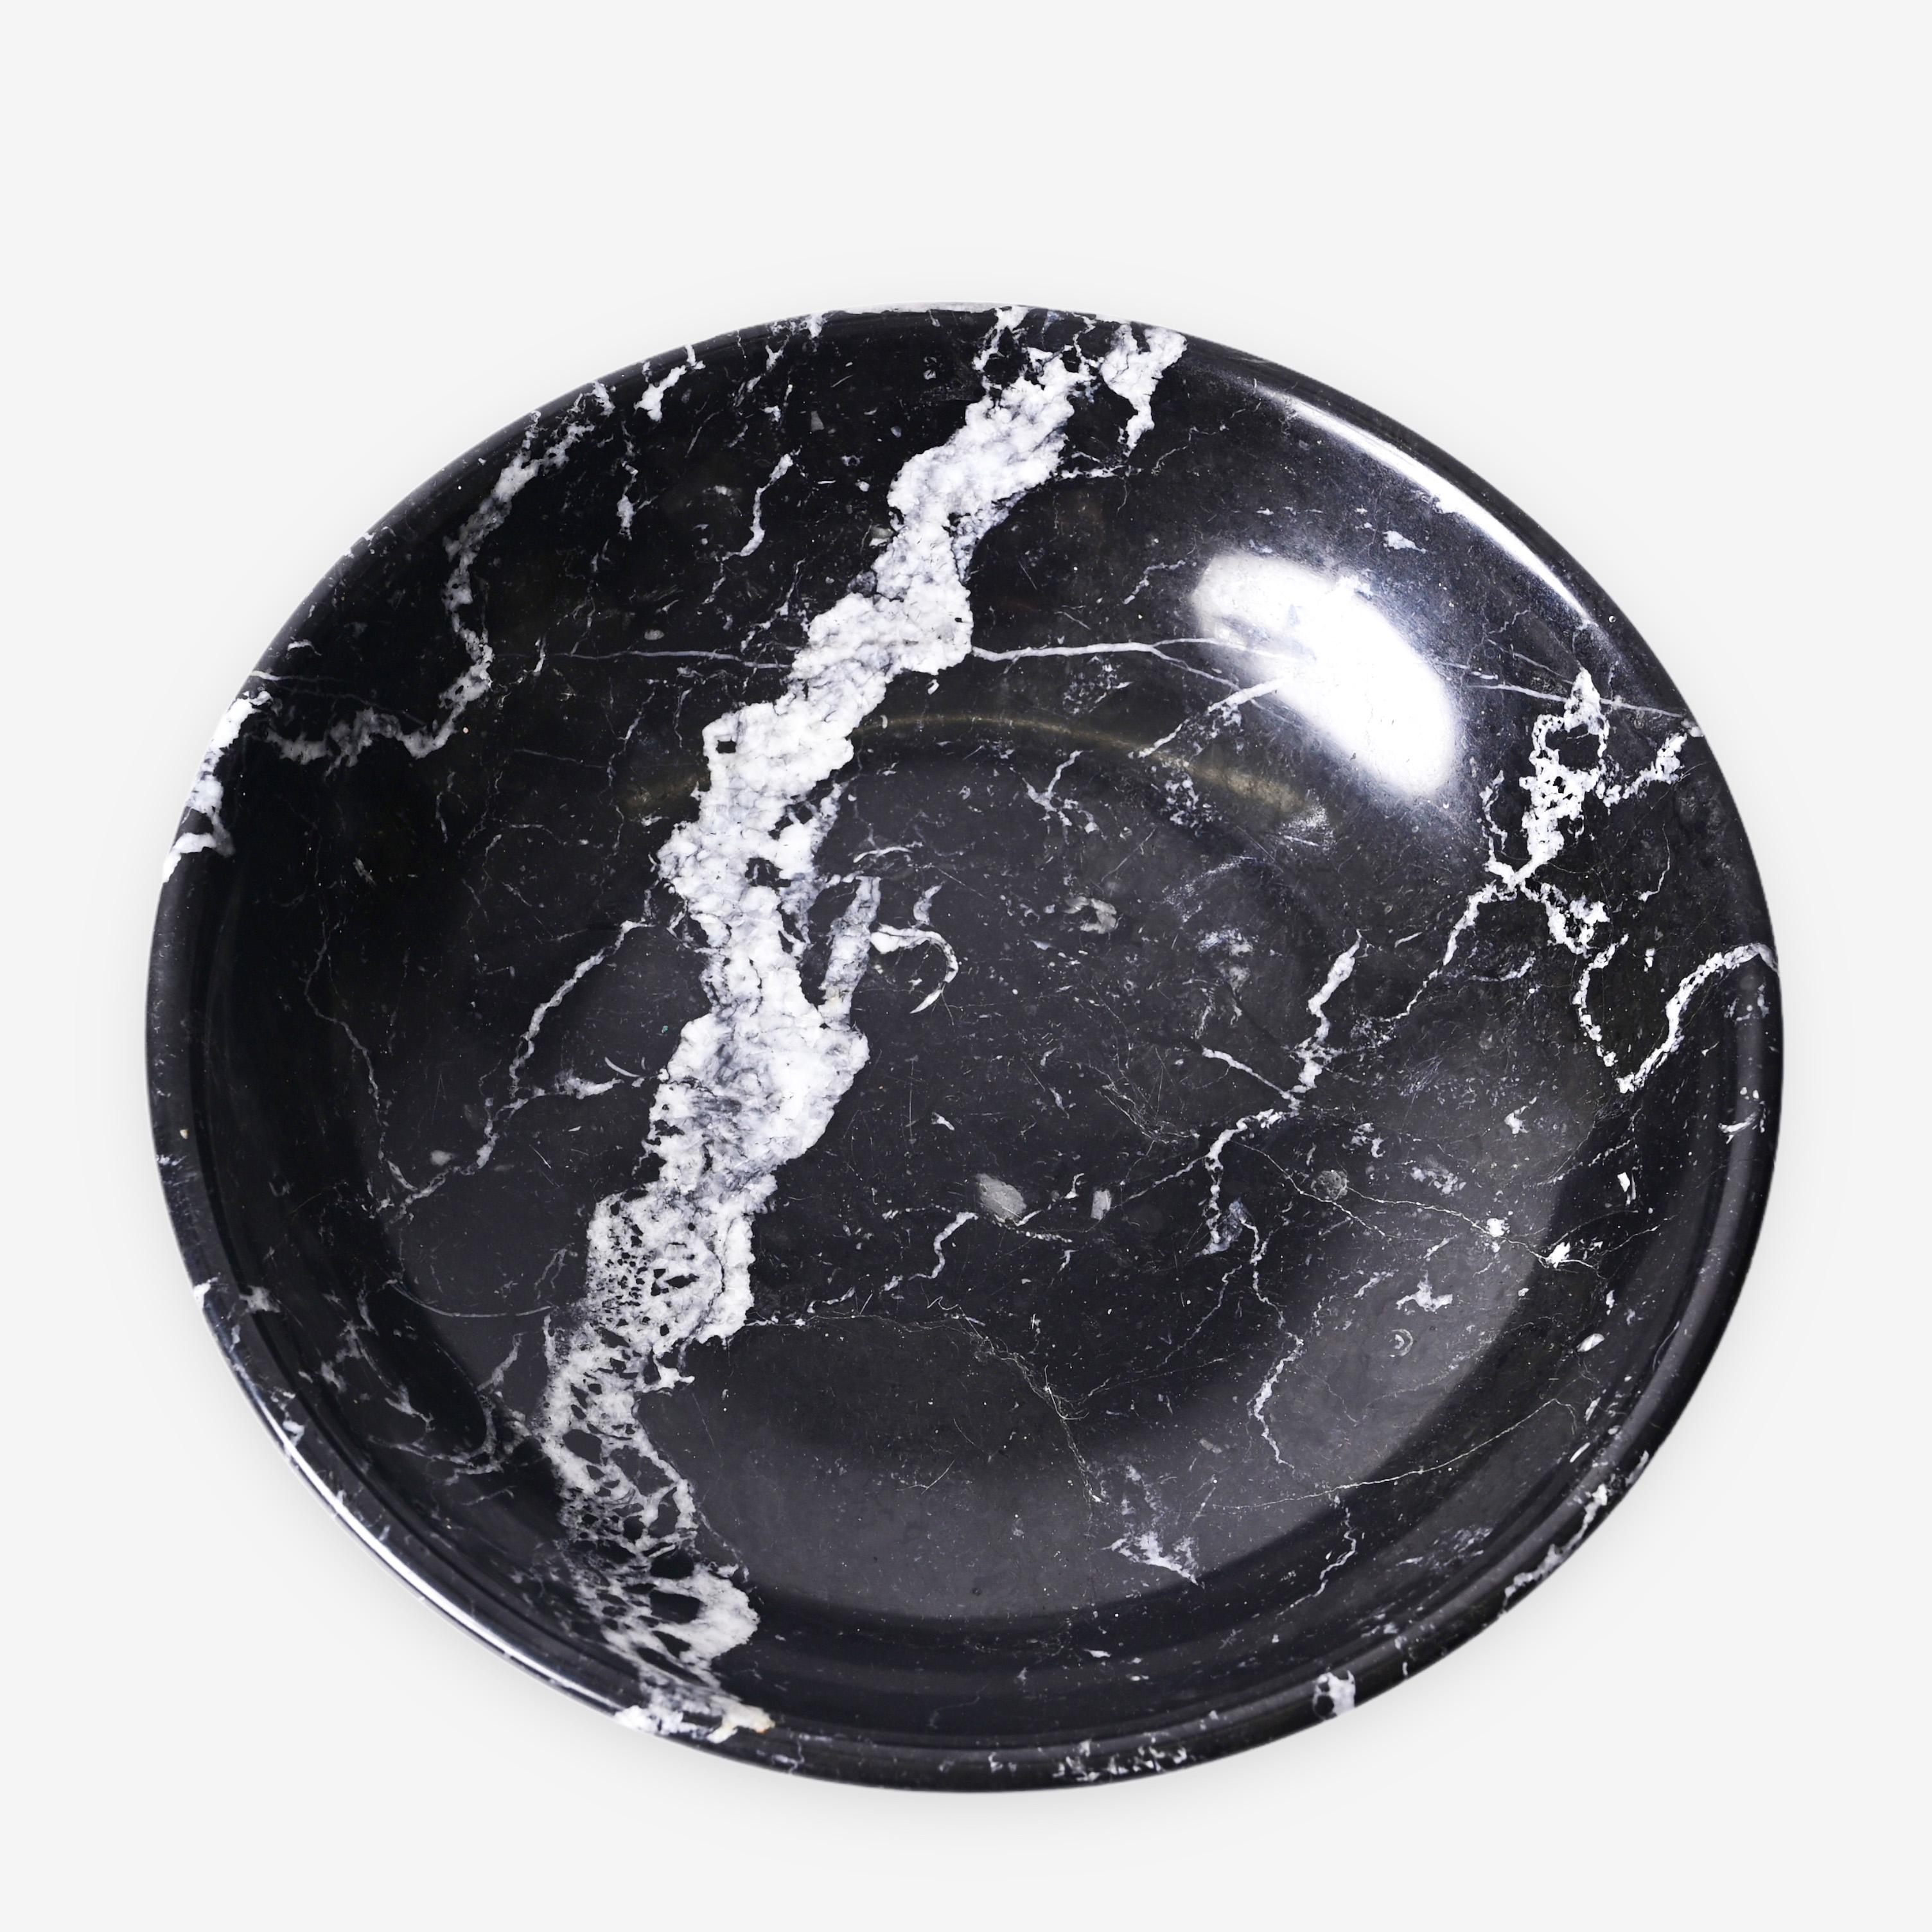 Amazing black marble with white grains round desk bowl. This stunning piece was designed in Italy during the 1950s.

The light white veins contrast highlights the deep black marble: this fantastic mix of marbles creates a breathtaking